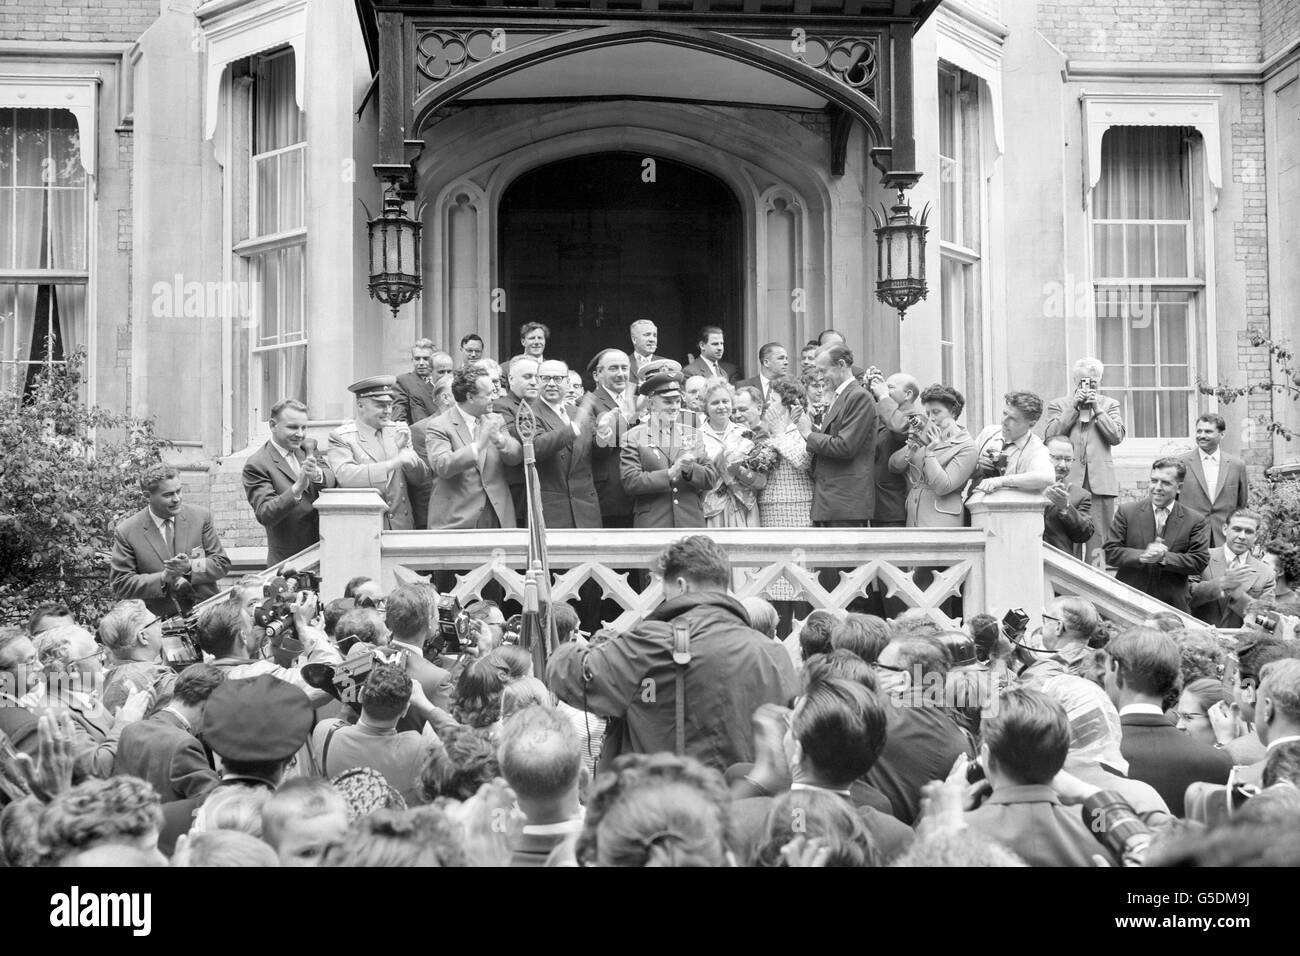 Russian cosmonaut Major Yuri Gagarin applauds the applauders in the packed entrance as he was greeted on his arrival at the Soviet Embassy in Kensington Palace Gardens, London. In foreground, below, photographers work in a press of people eager to greet the first man to travel in space. Major Gagarin had just driven in from London Airport to begin a visit to Britain. Stock Photo